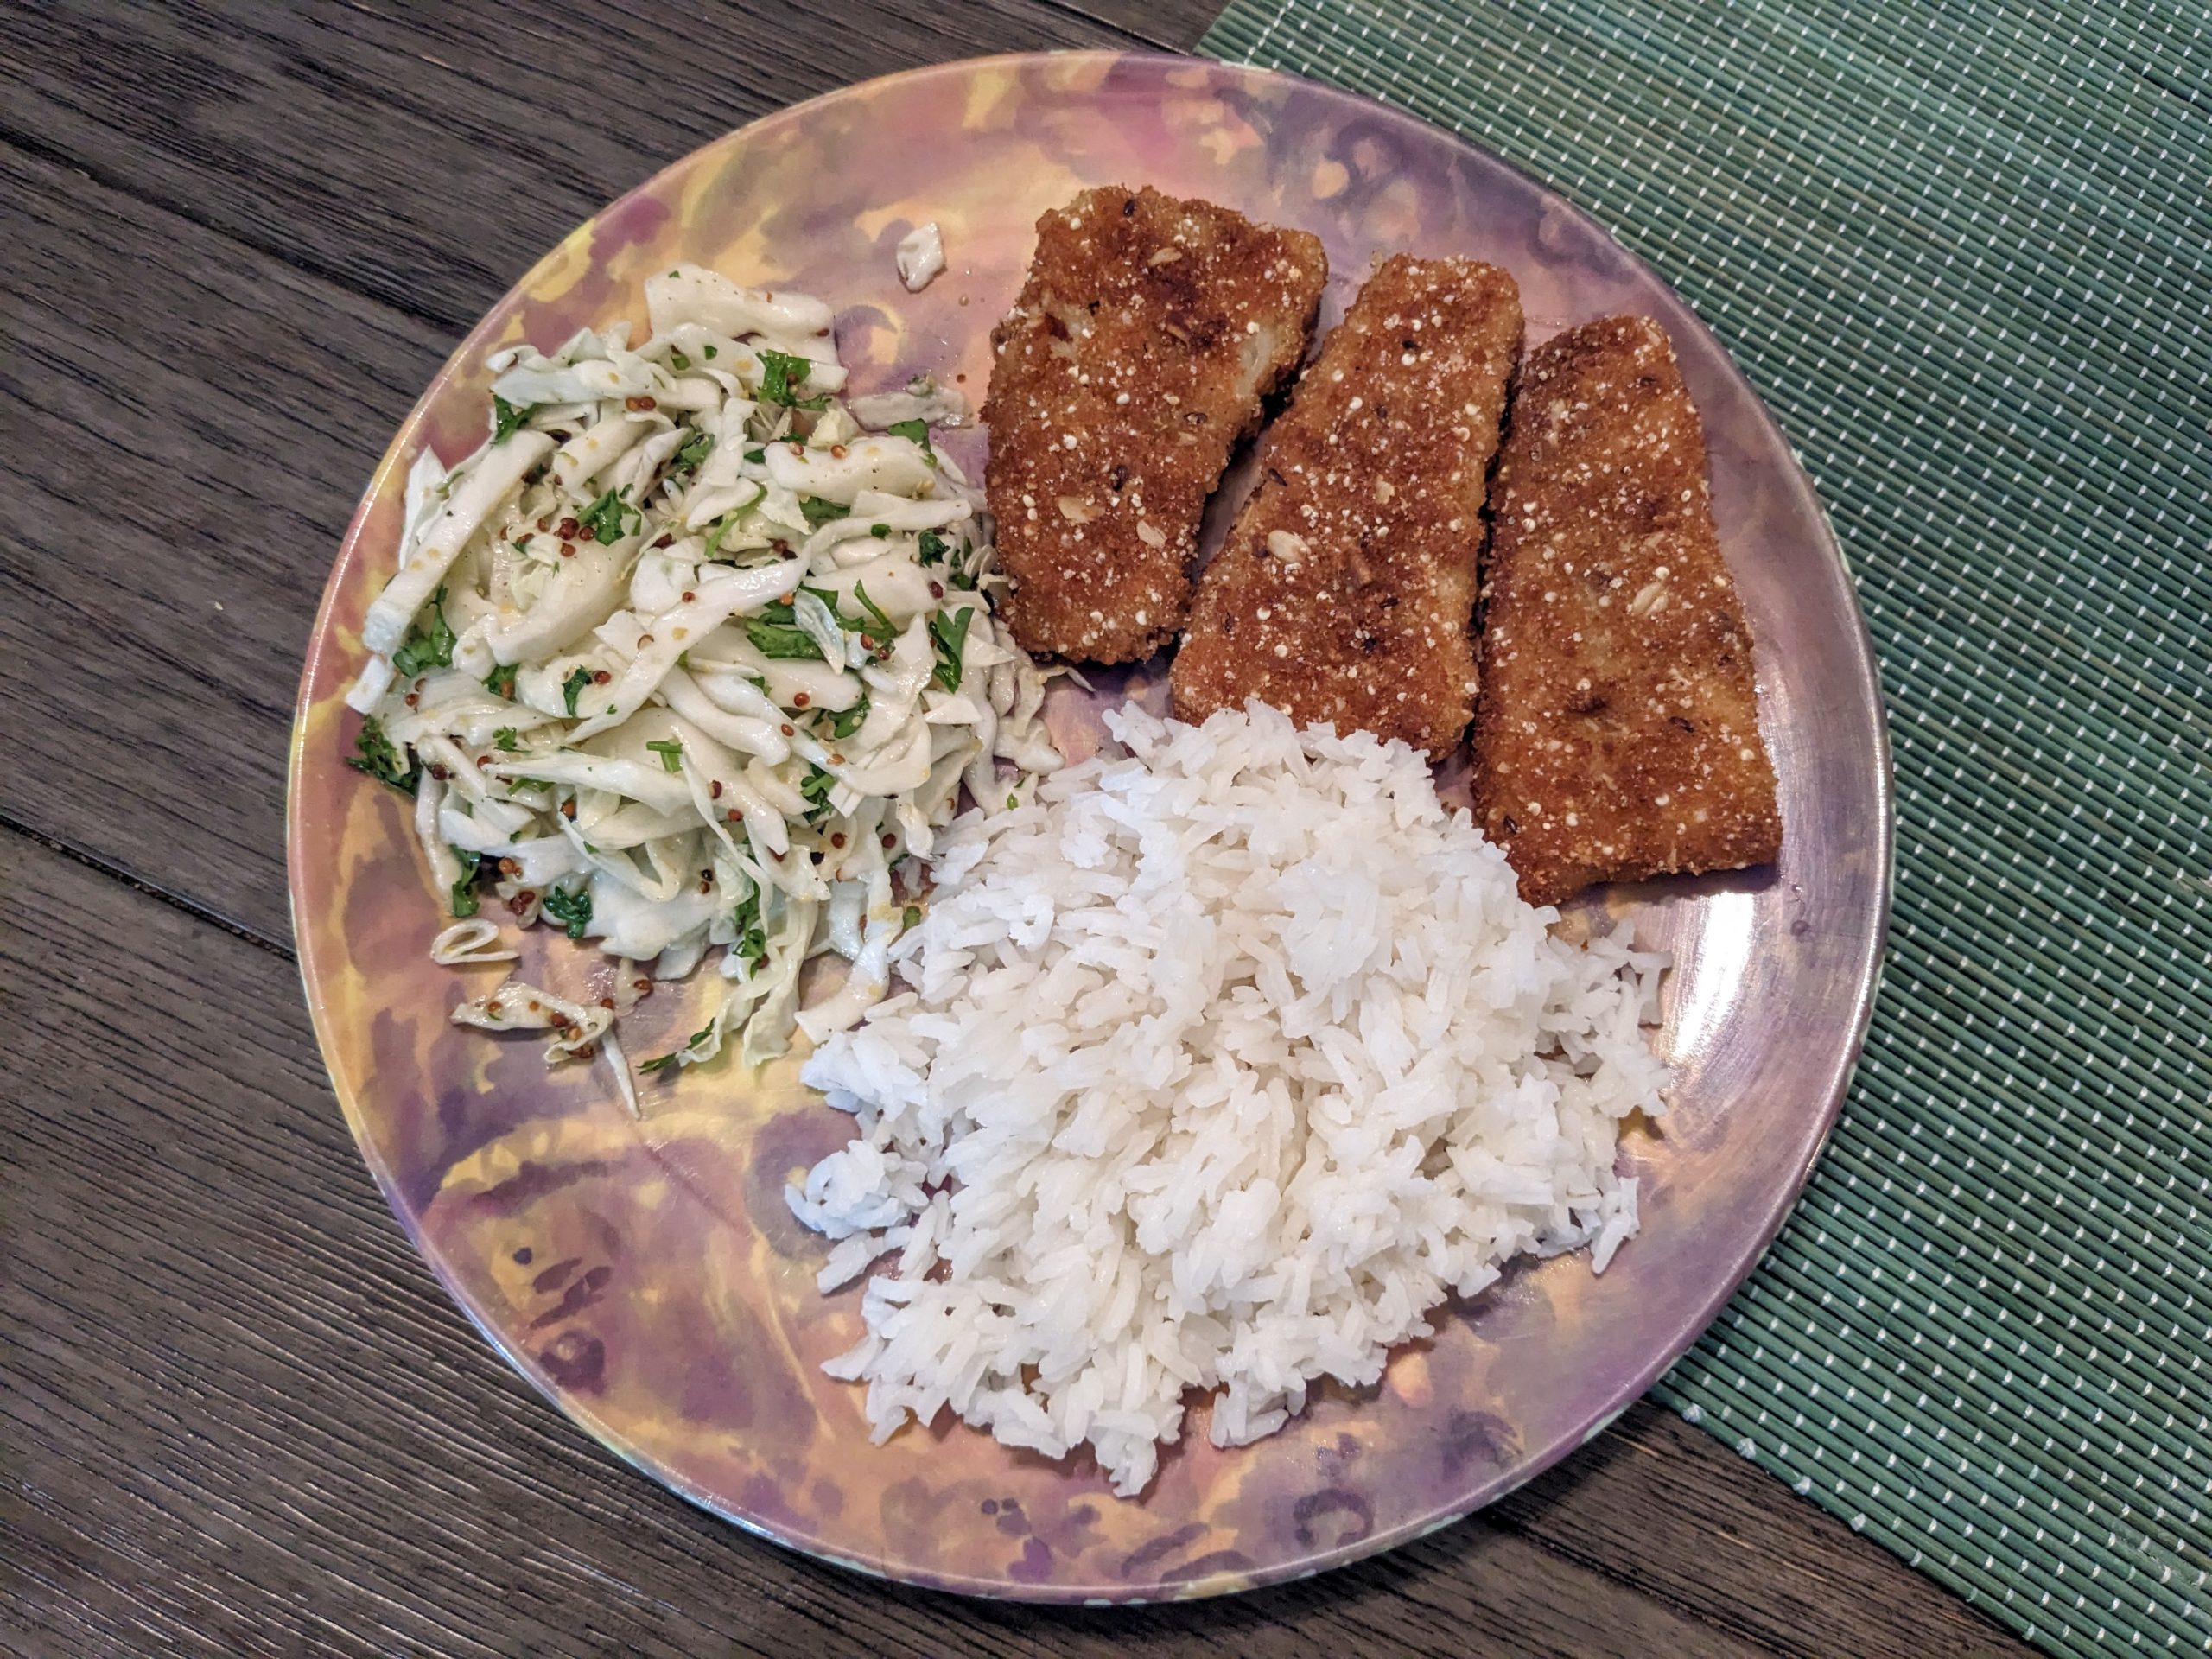 Picture of fried fish, rice, and coleslaw on a plate on a wooden table and blue/green placemat